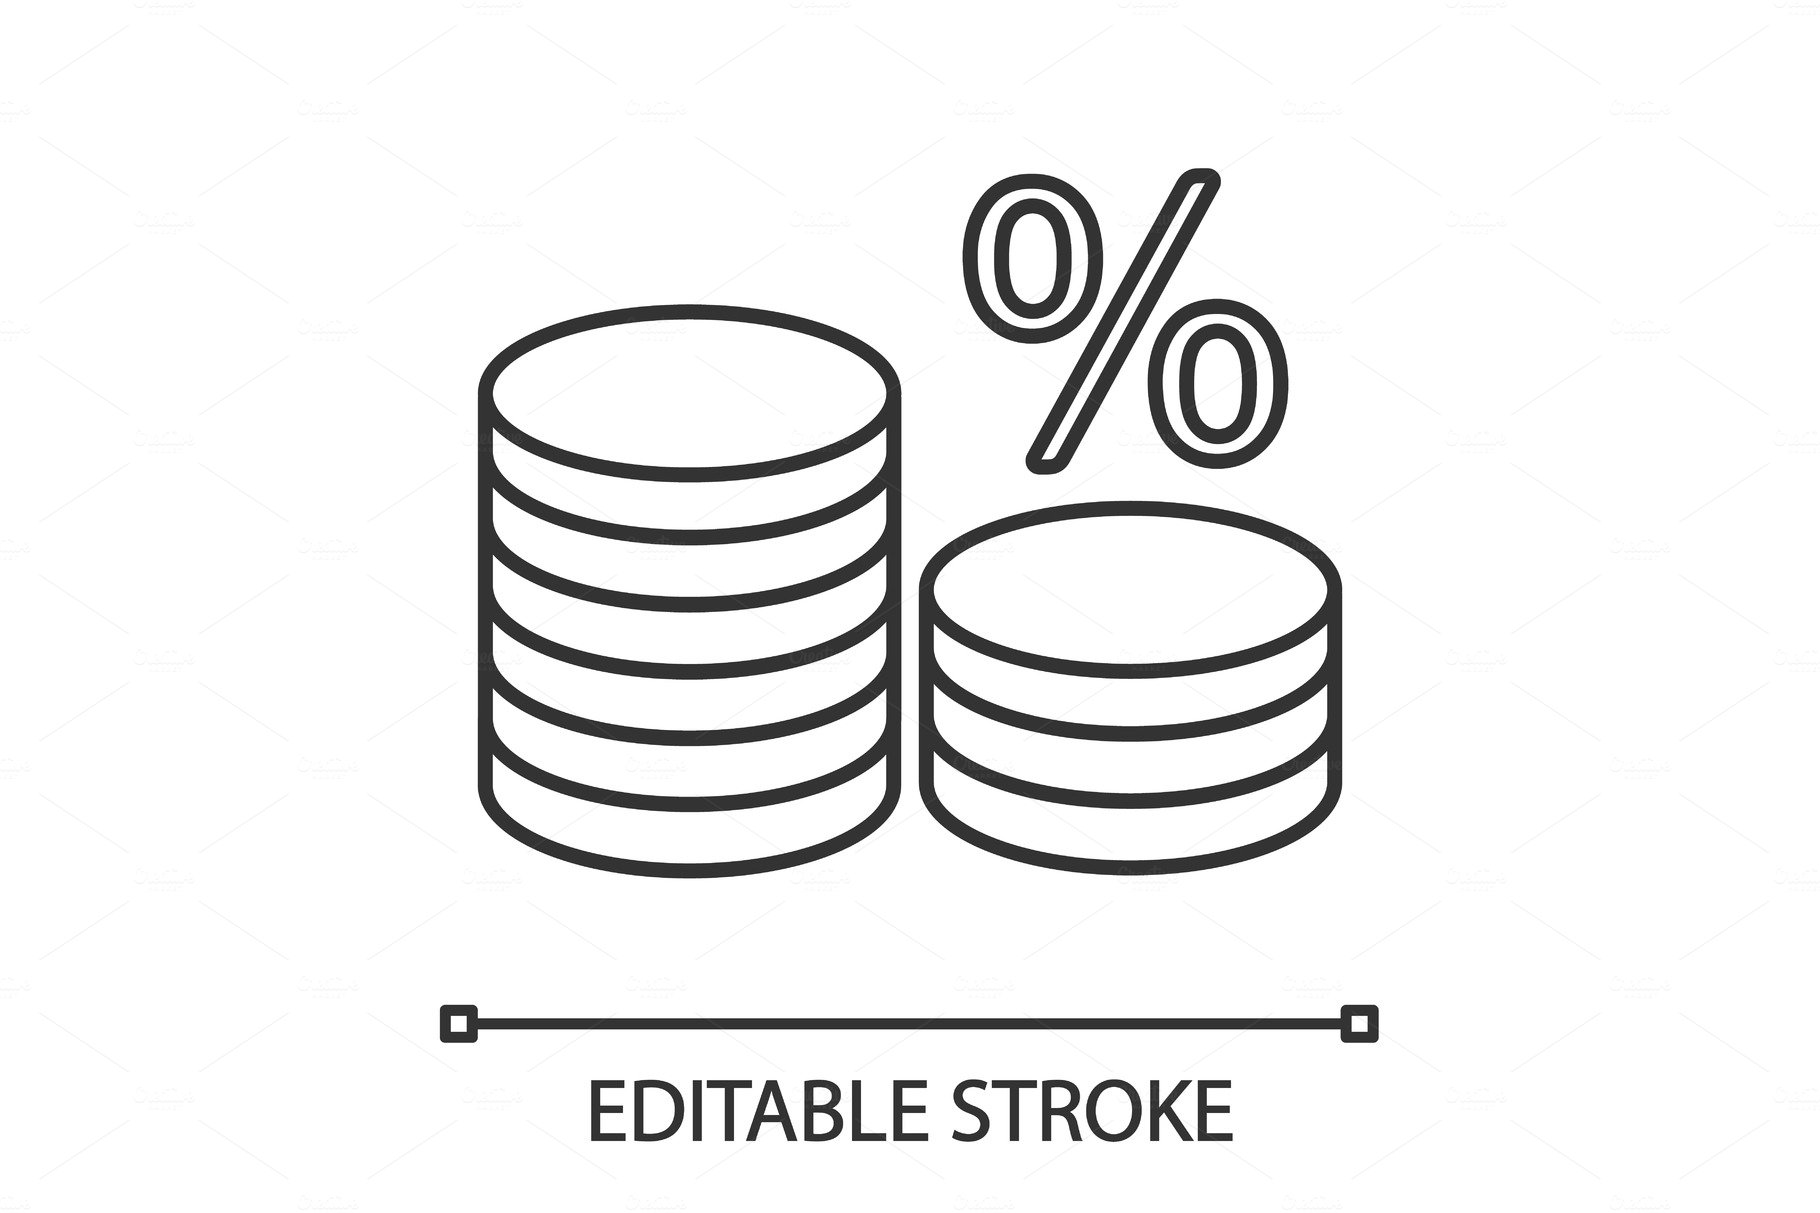 Coin stack with percent linear icon cover image.